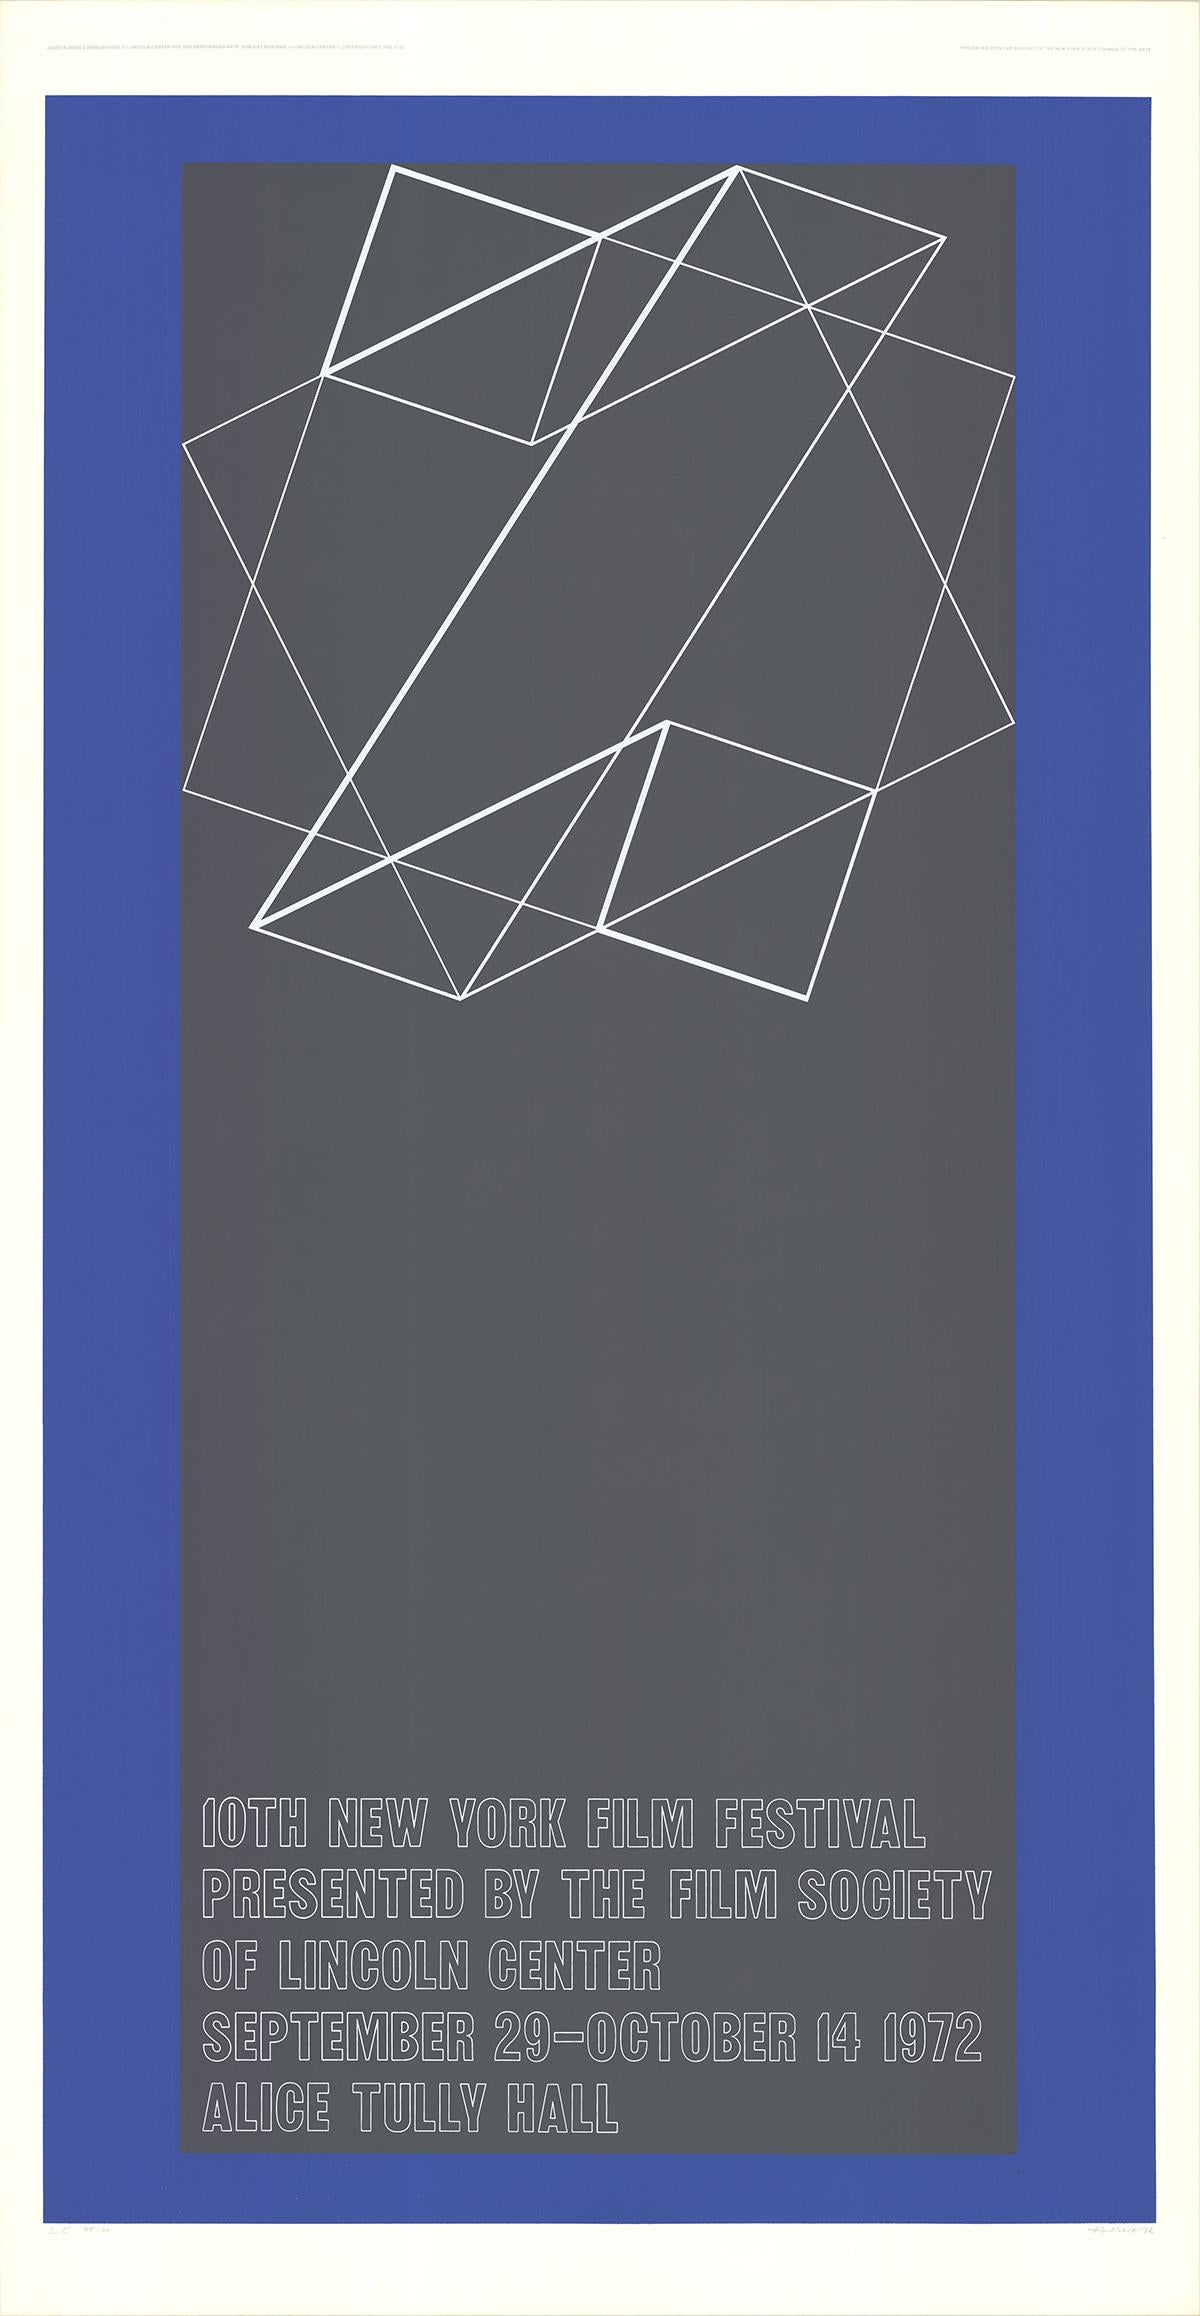 Sku: LC1082-B
Artist: Josef Albers
Title: The 10th New York Film Festival
Year: 1972
Signed: Yes
Medium: Serigraph
Paper Size: 50 x 26 inches ( 127 x 66.04 cm )
Image Size: 50 x 26 inches ( 127 x 66.04 cm )
Edition Size: 144
Framed: No
Condition: